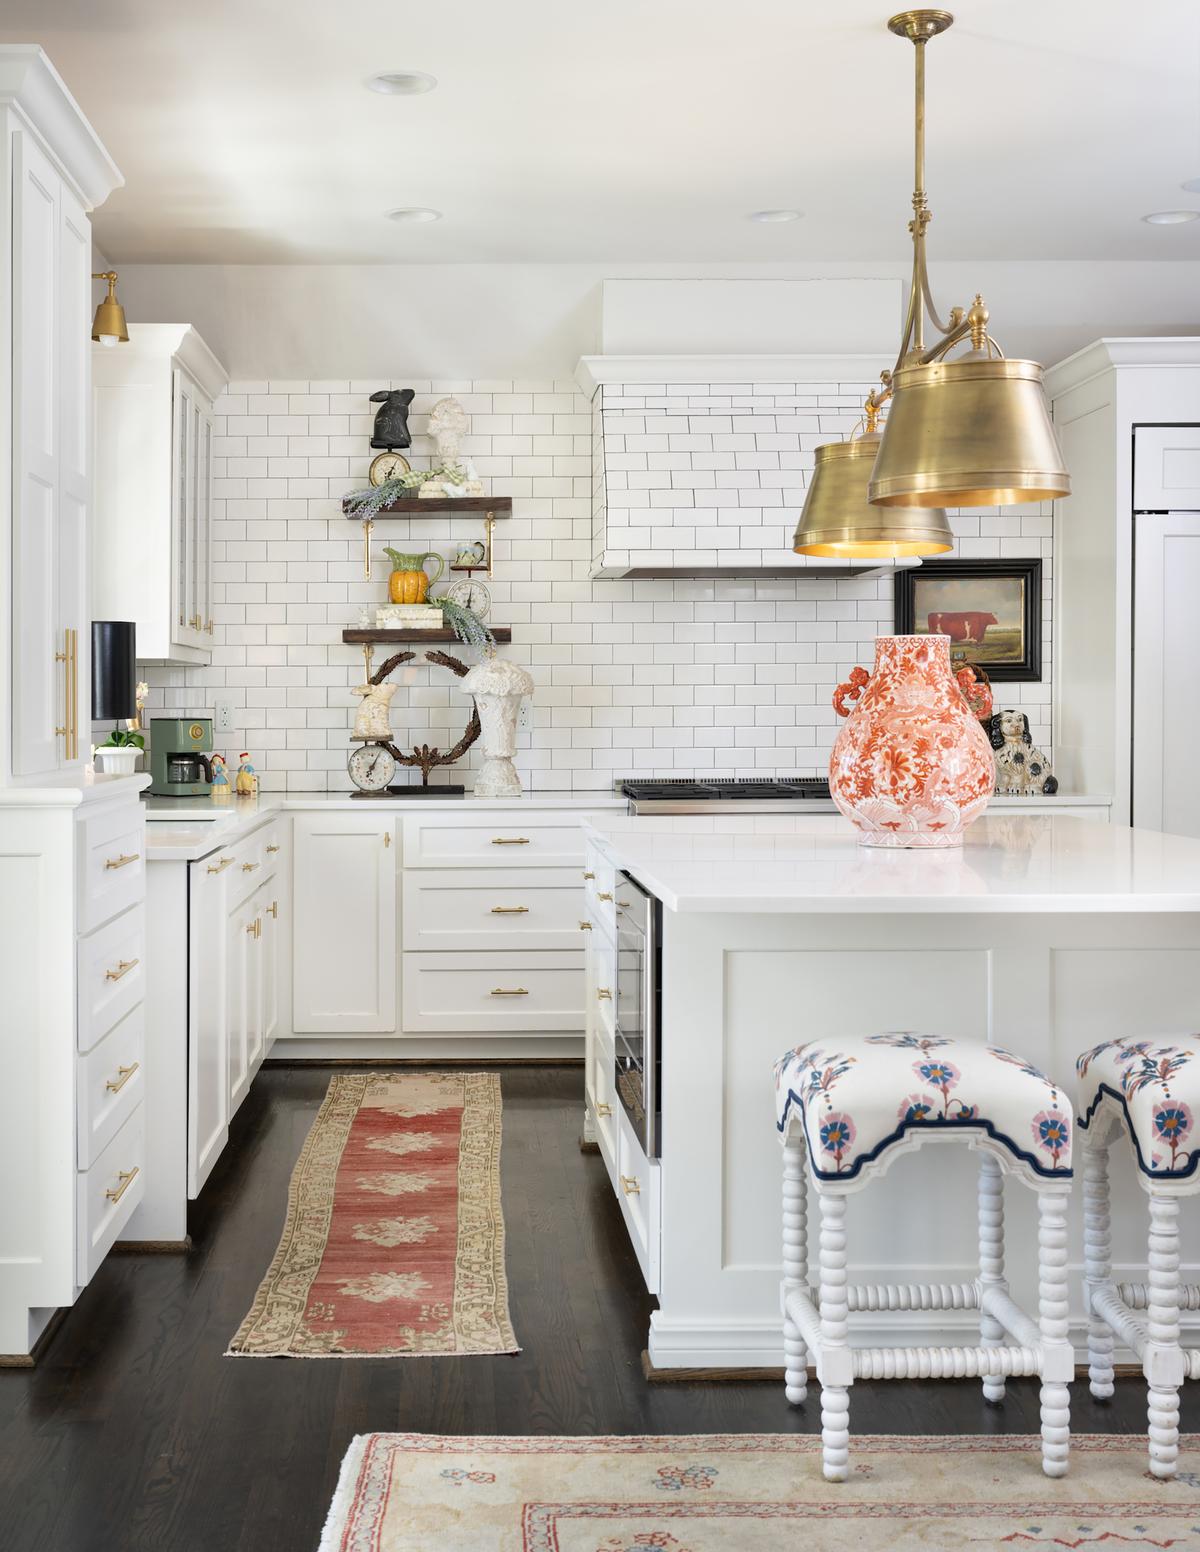 Anne lives for preppy chinoiserie, so a burnt orange vase makes perfect sense as the focal point of her kitchen island. Above it, she added brushed brass pendant lights. (Handout/TNS)